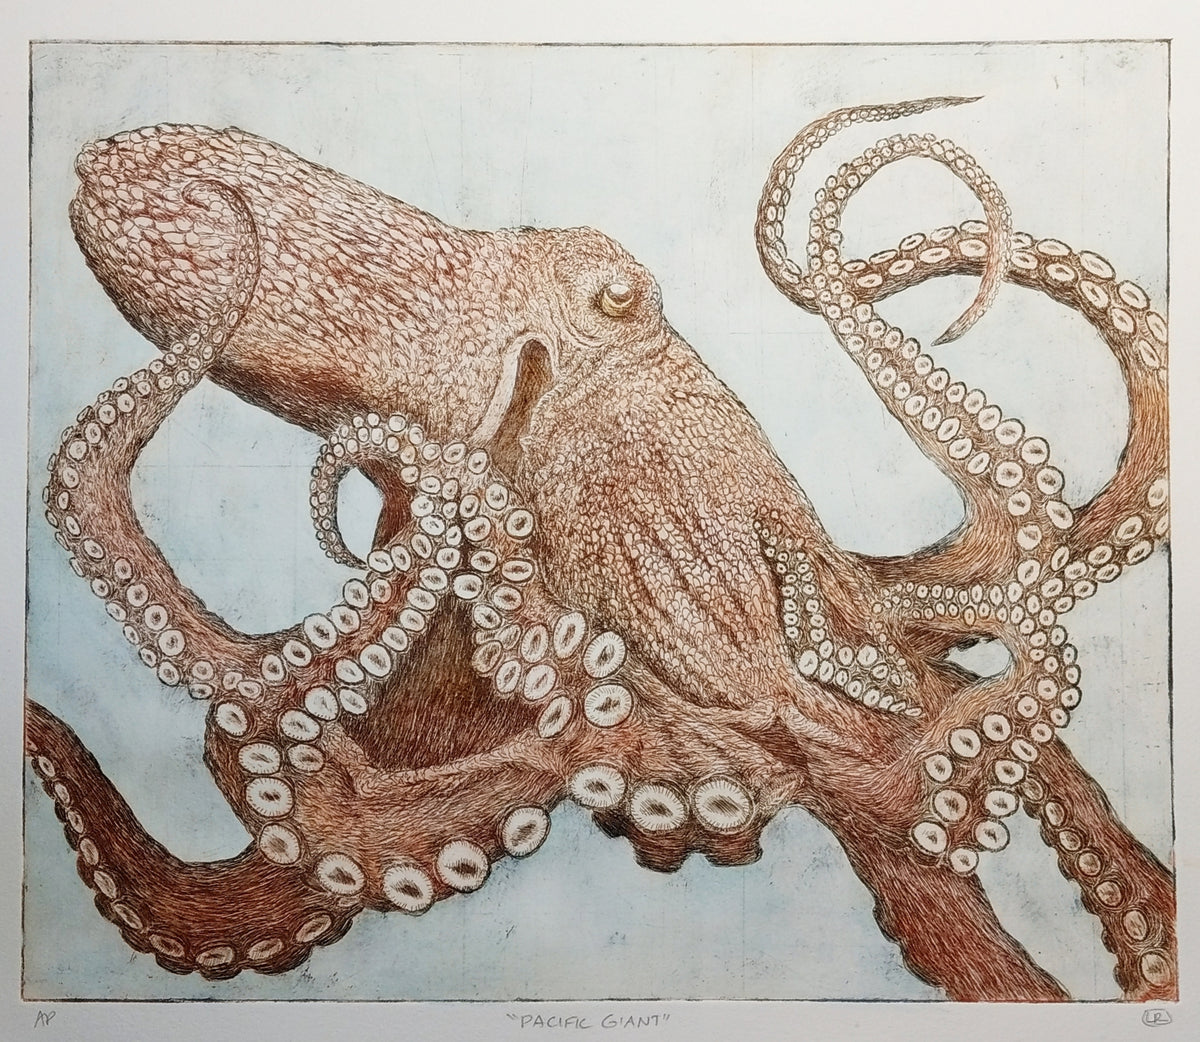 Pacific Giant Octopus - light hand tinted version (one of a kind)